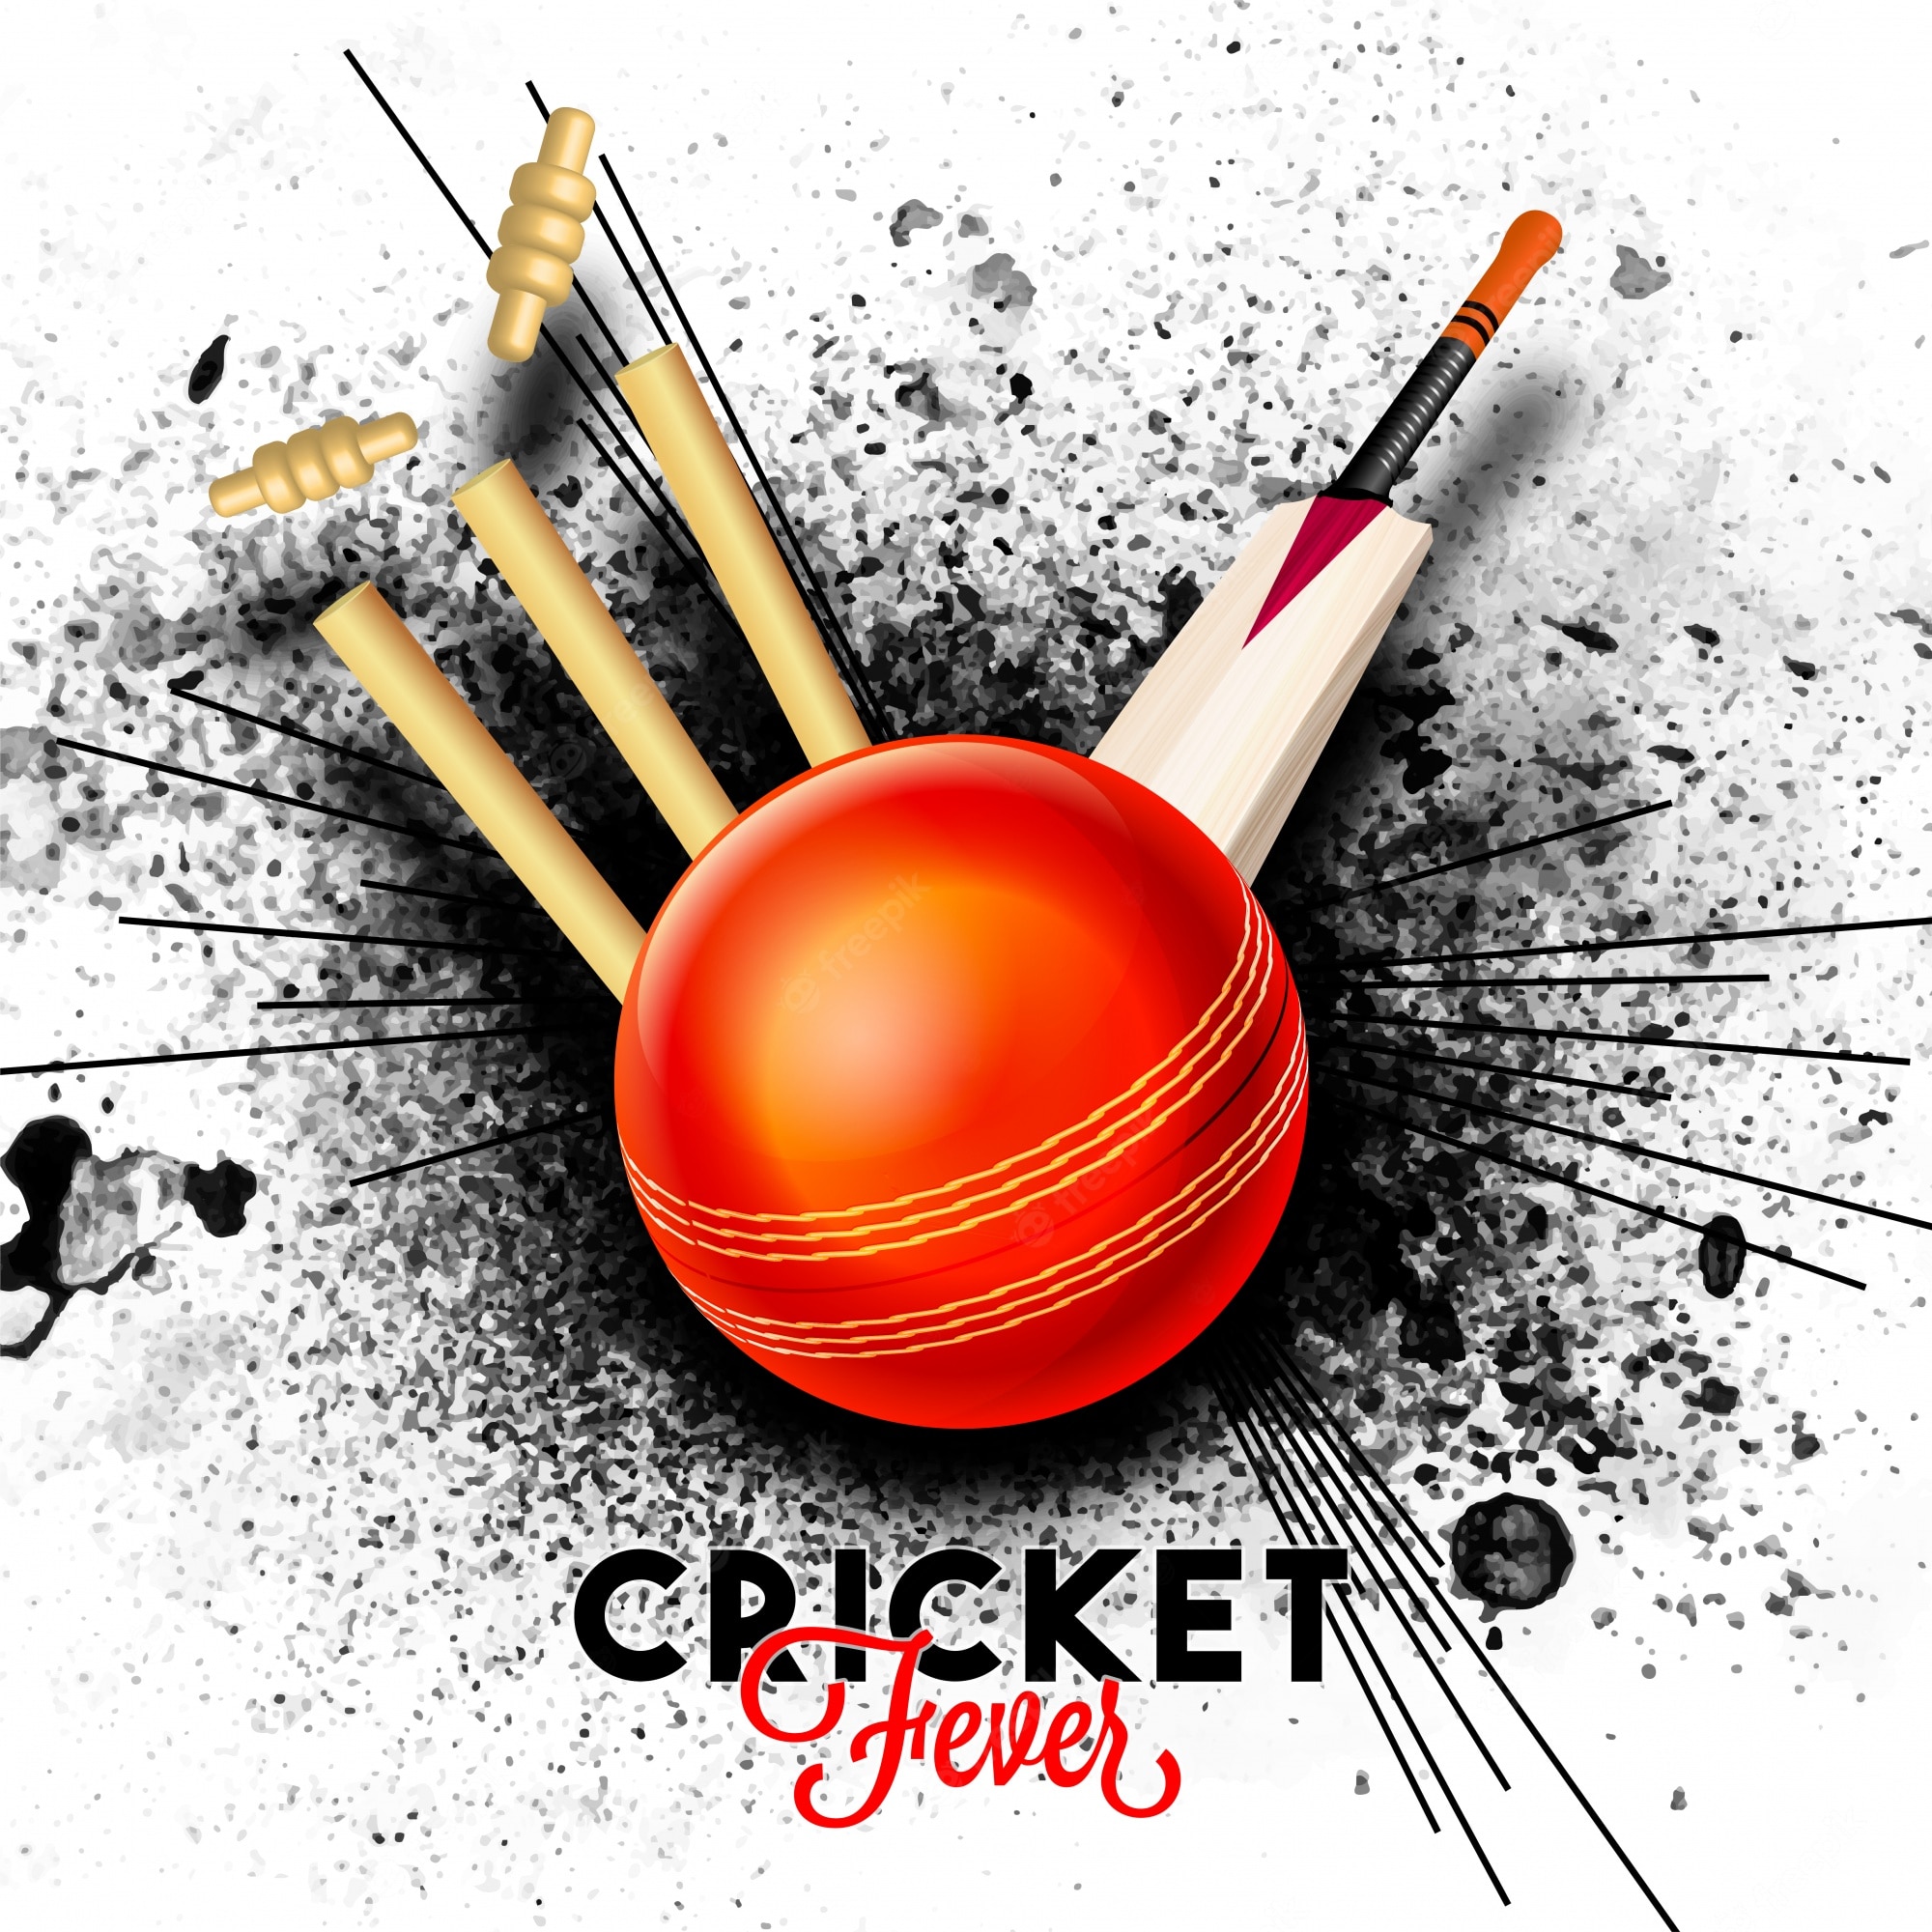 Cricket background Image. Free Vectors, & PSD